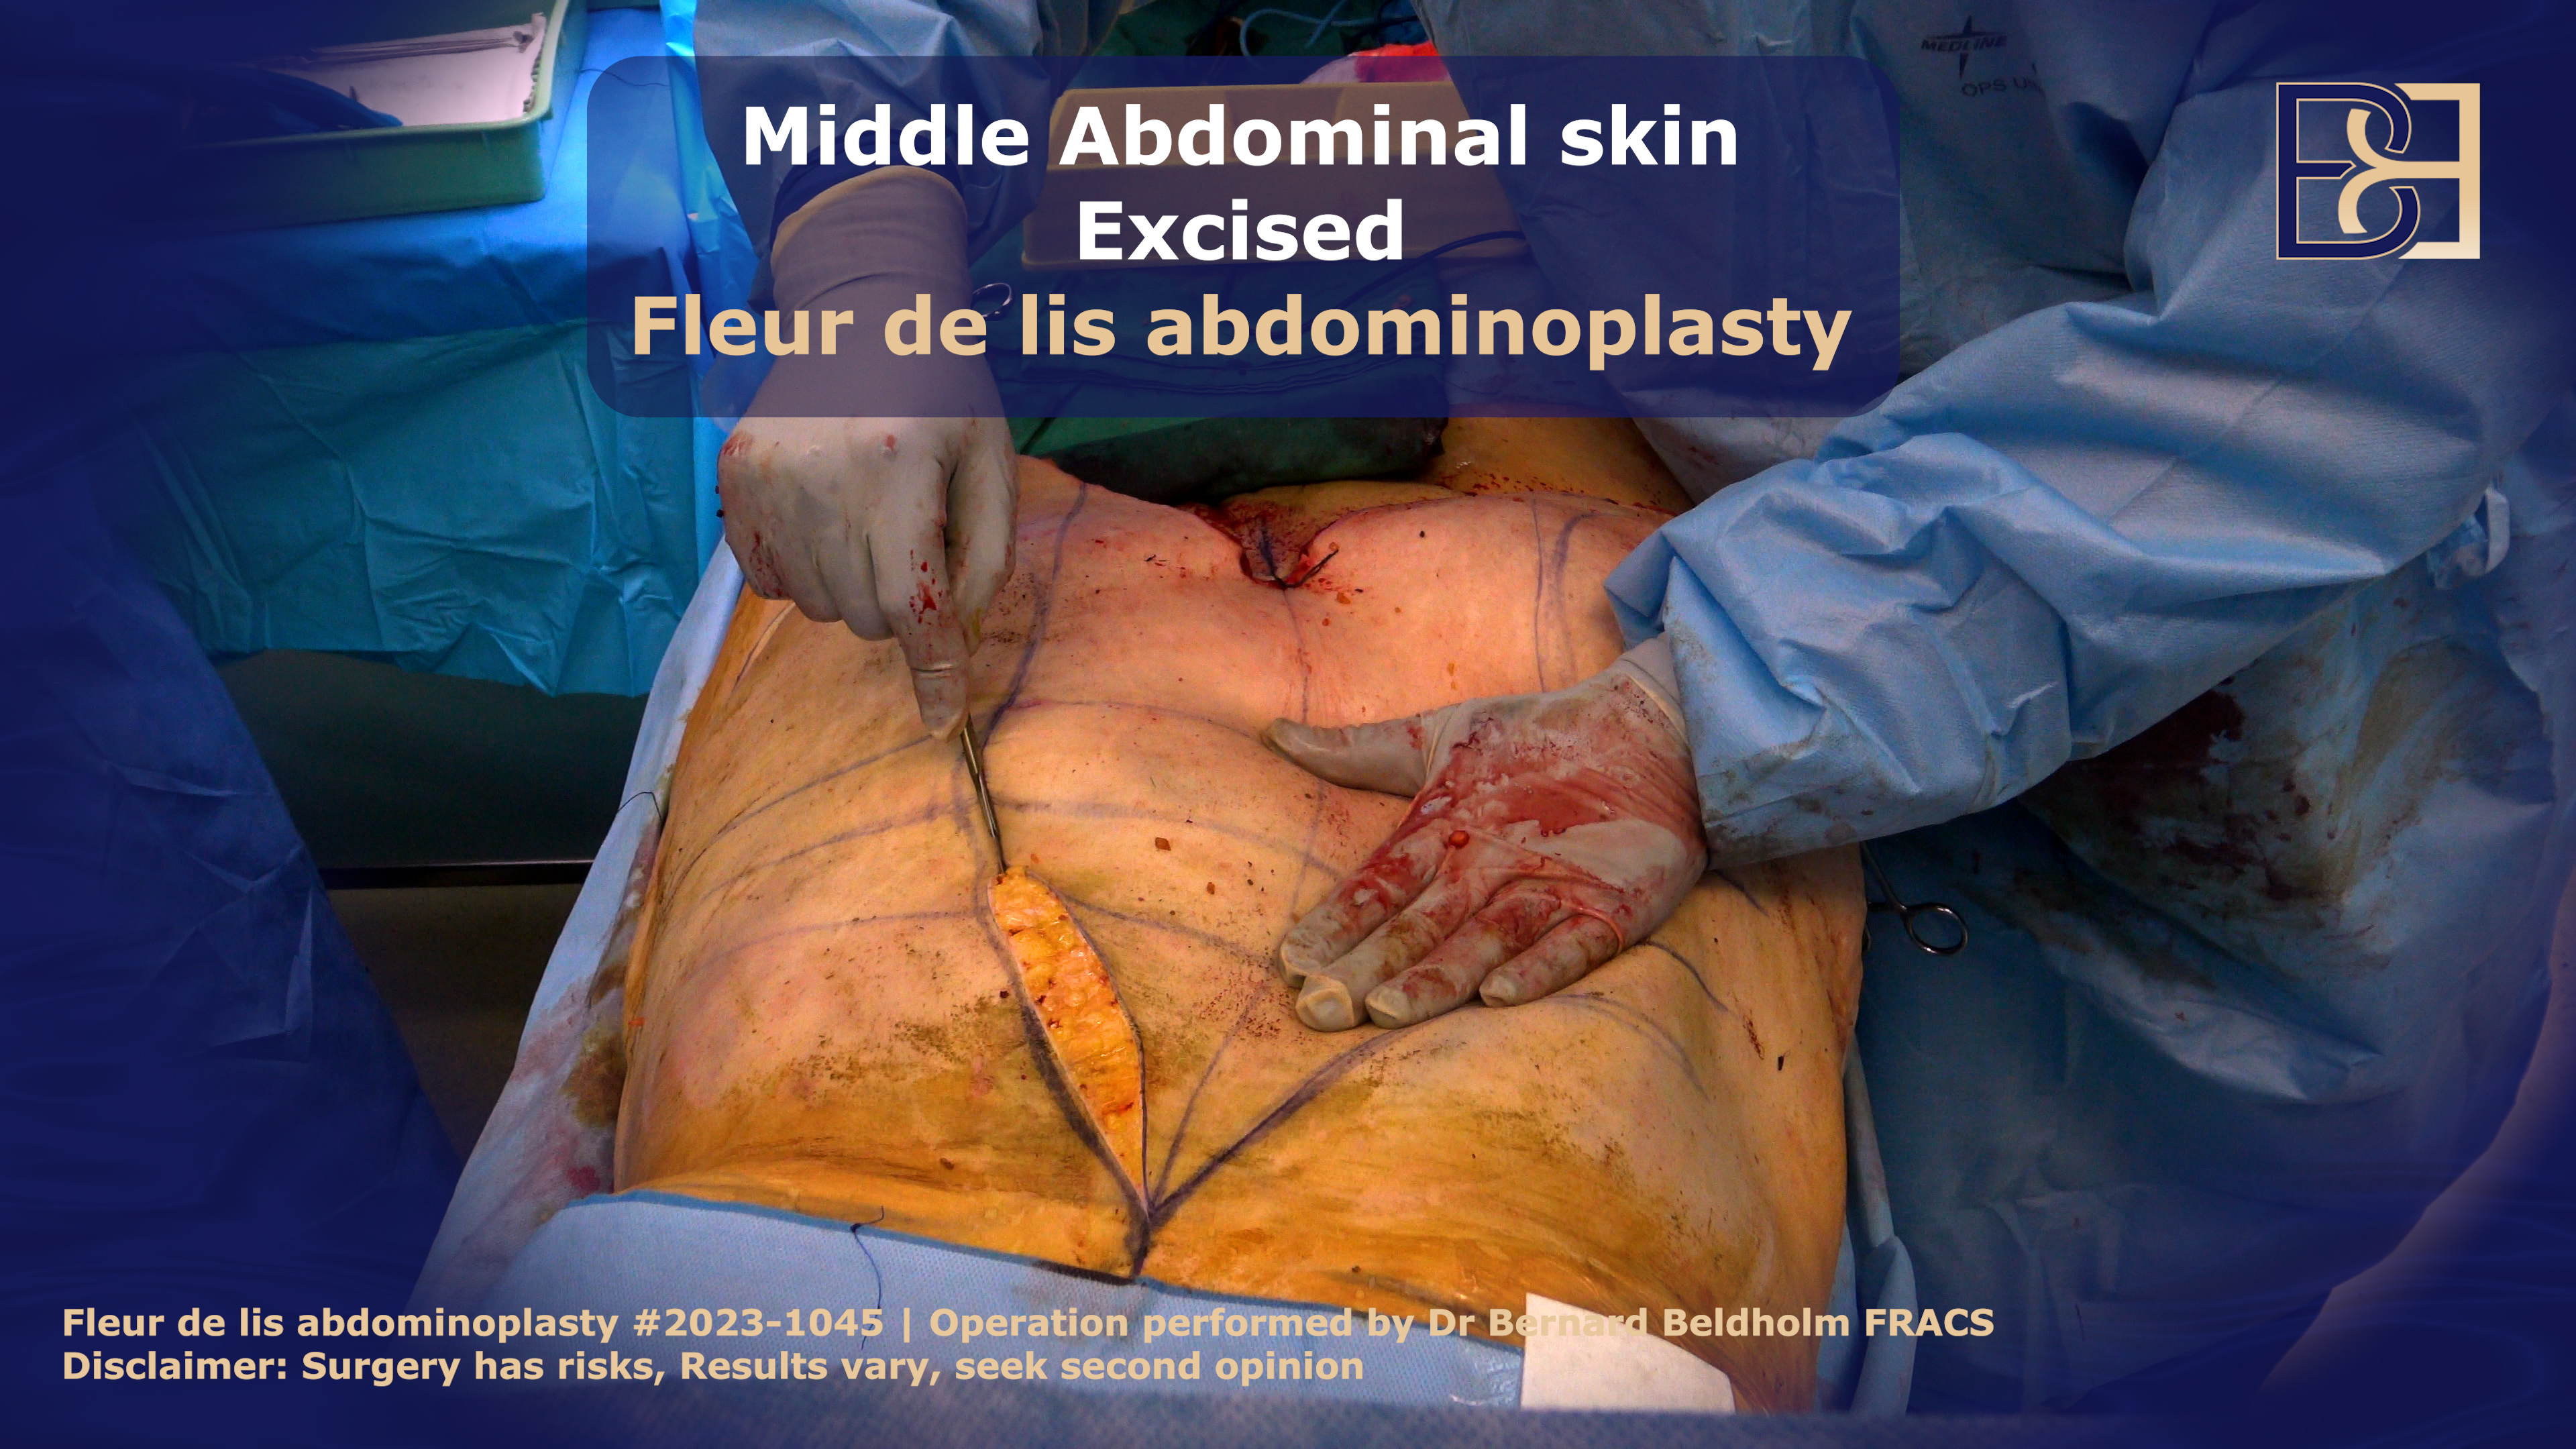 Removing loose skin in FDL surgery